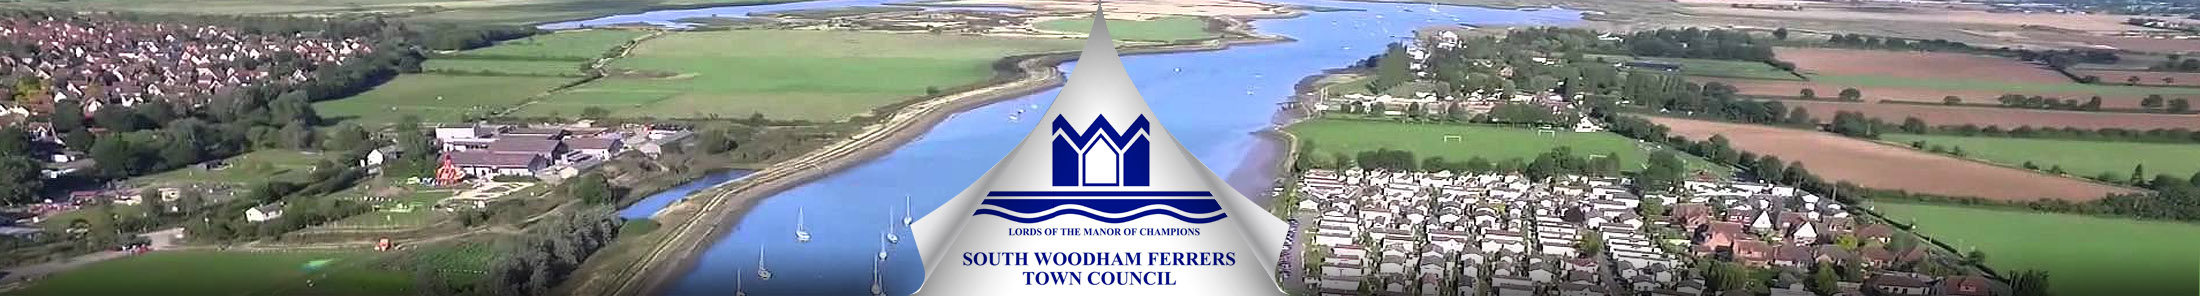 Header Image for South Woodham Ferrers Town Council